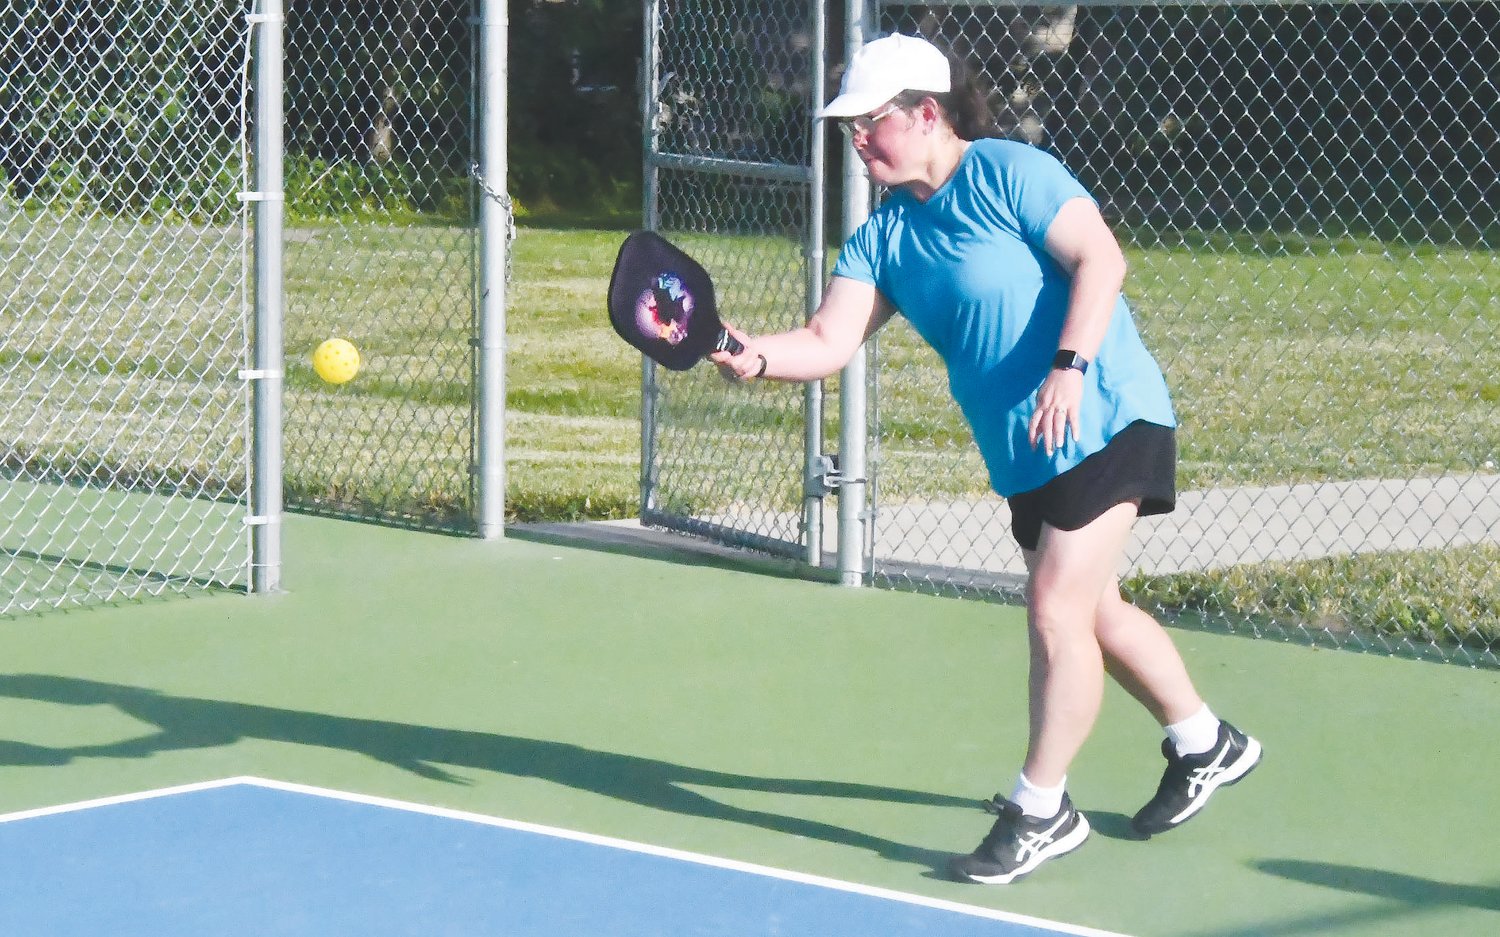 Norma Wamsley returns a shot during a pickleball match on Thursday, June 16, at Fox Park in Moberly.